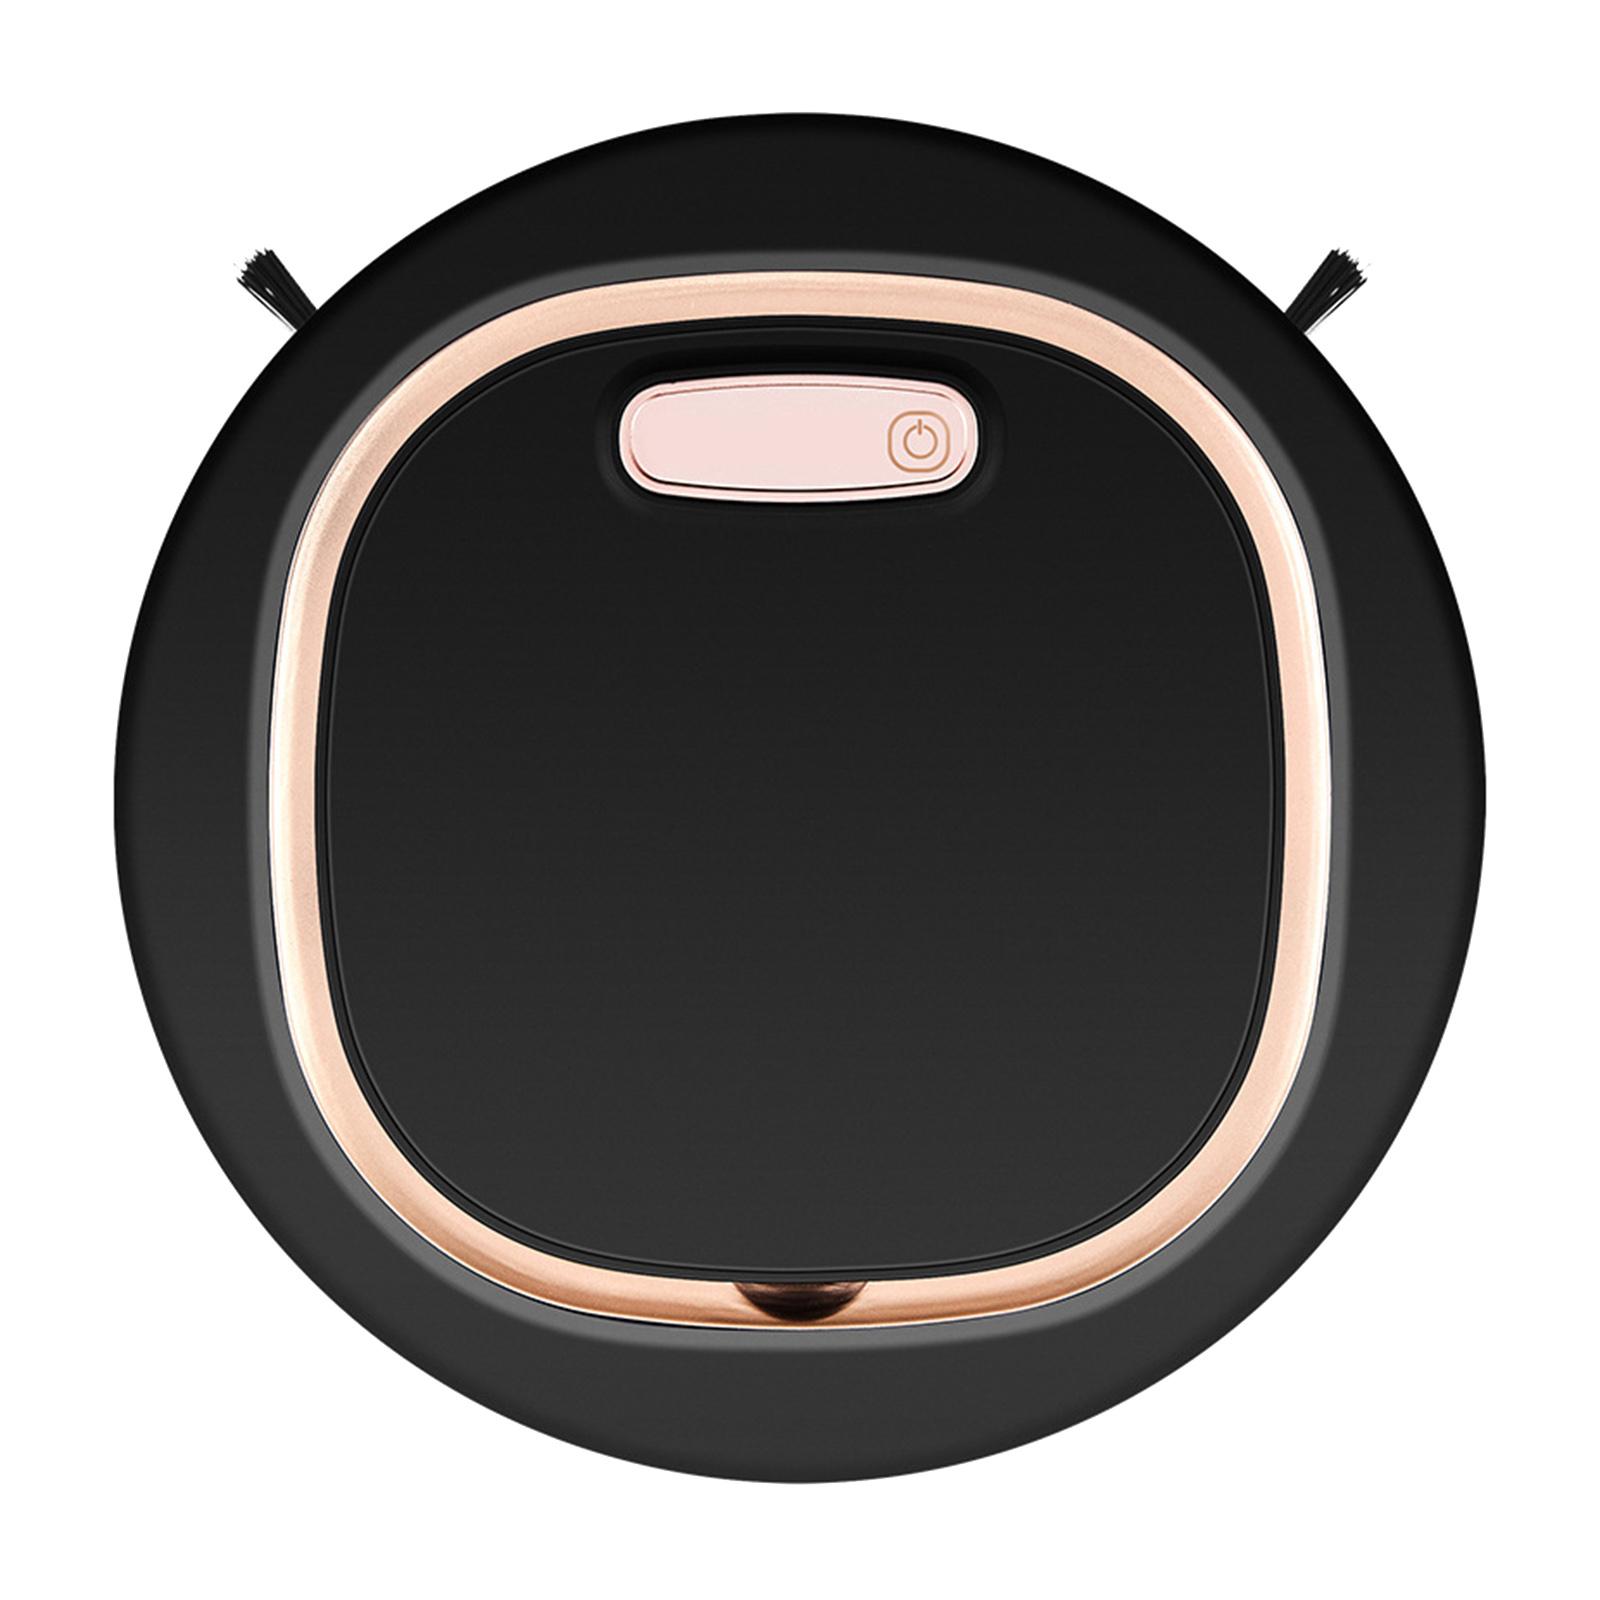 3 in 1 Robot Vacuum Cleaner, Strong Suction,Slim, Quiet, Great for Pet Hair Hard Floor and Low Pile Carpet